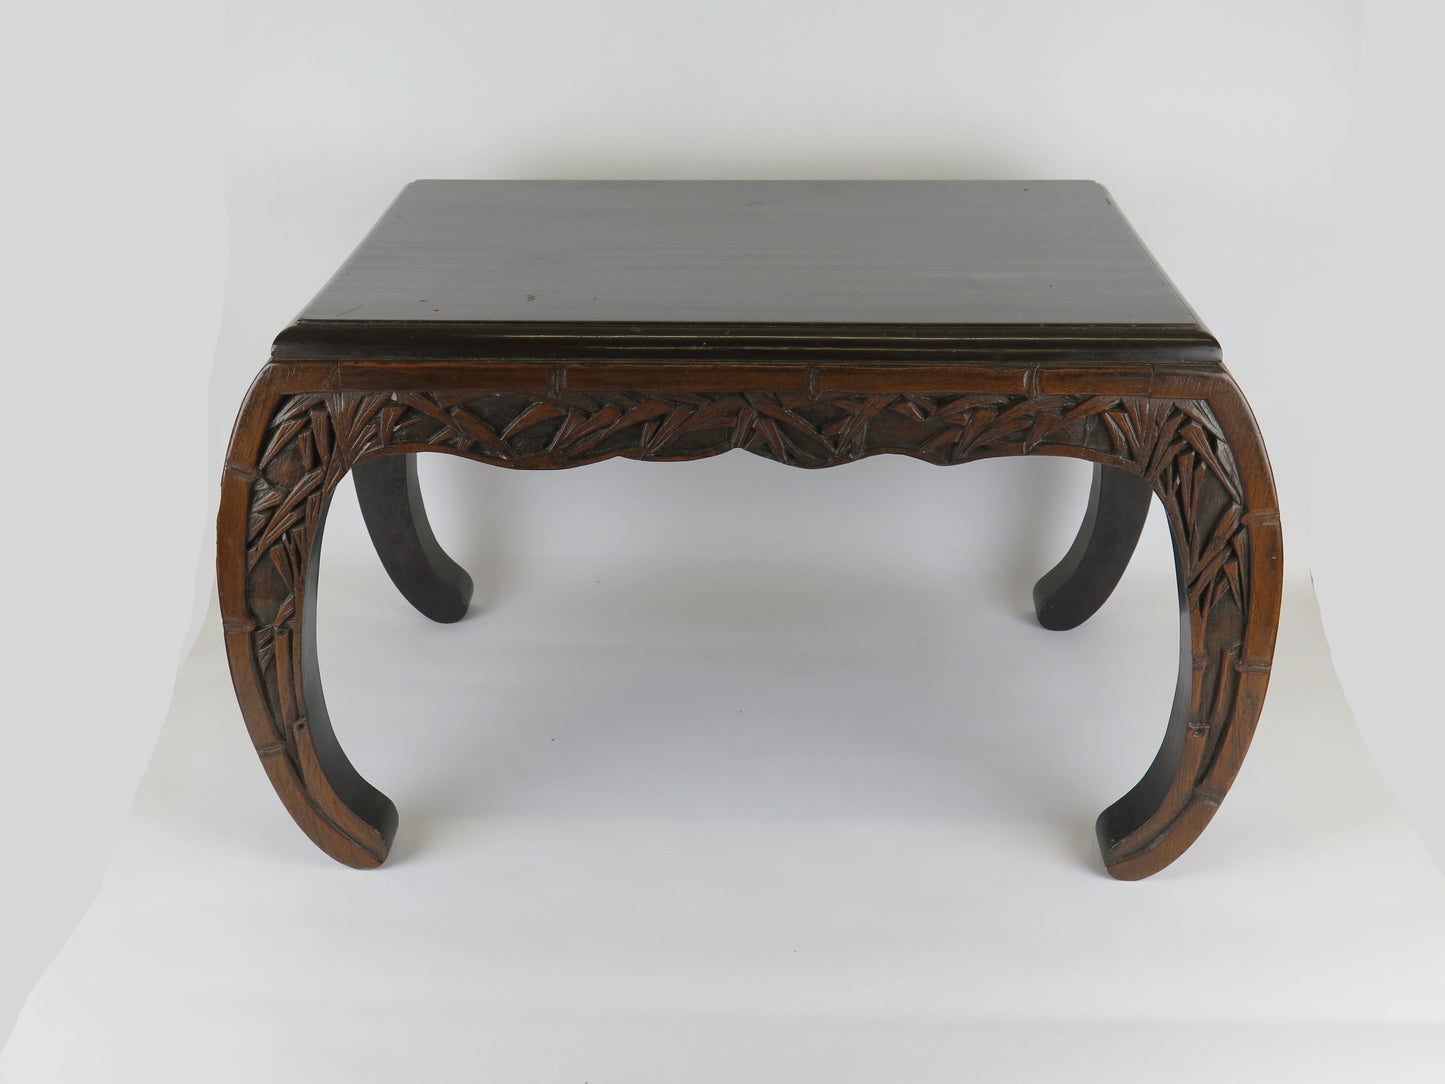 Vintage Chinese opium coffee table carved wood coffee table china CM